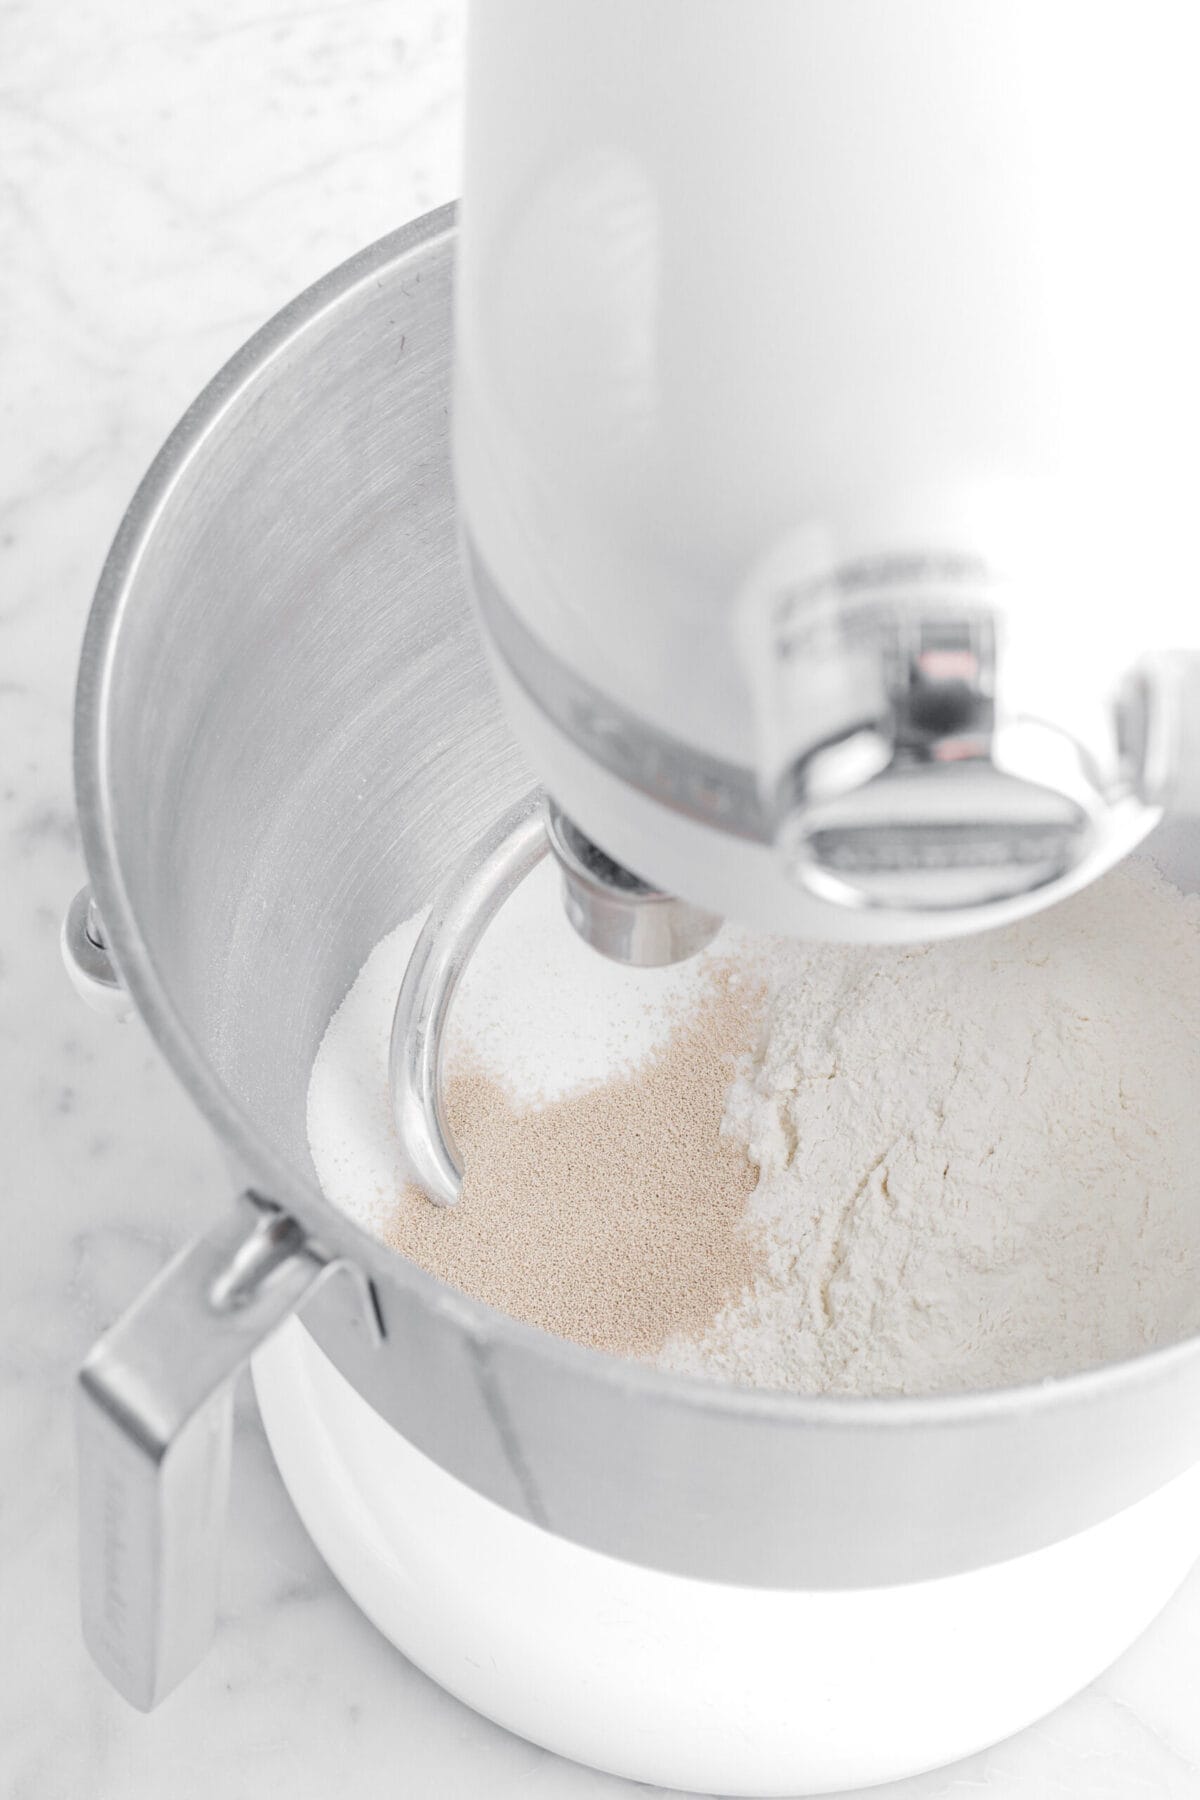 flour, yeast, and sugar in stand mixer.